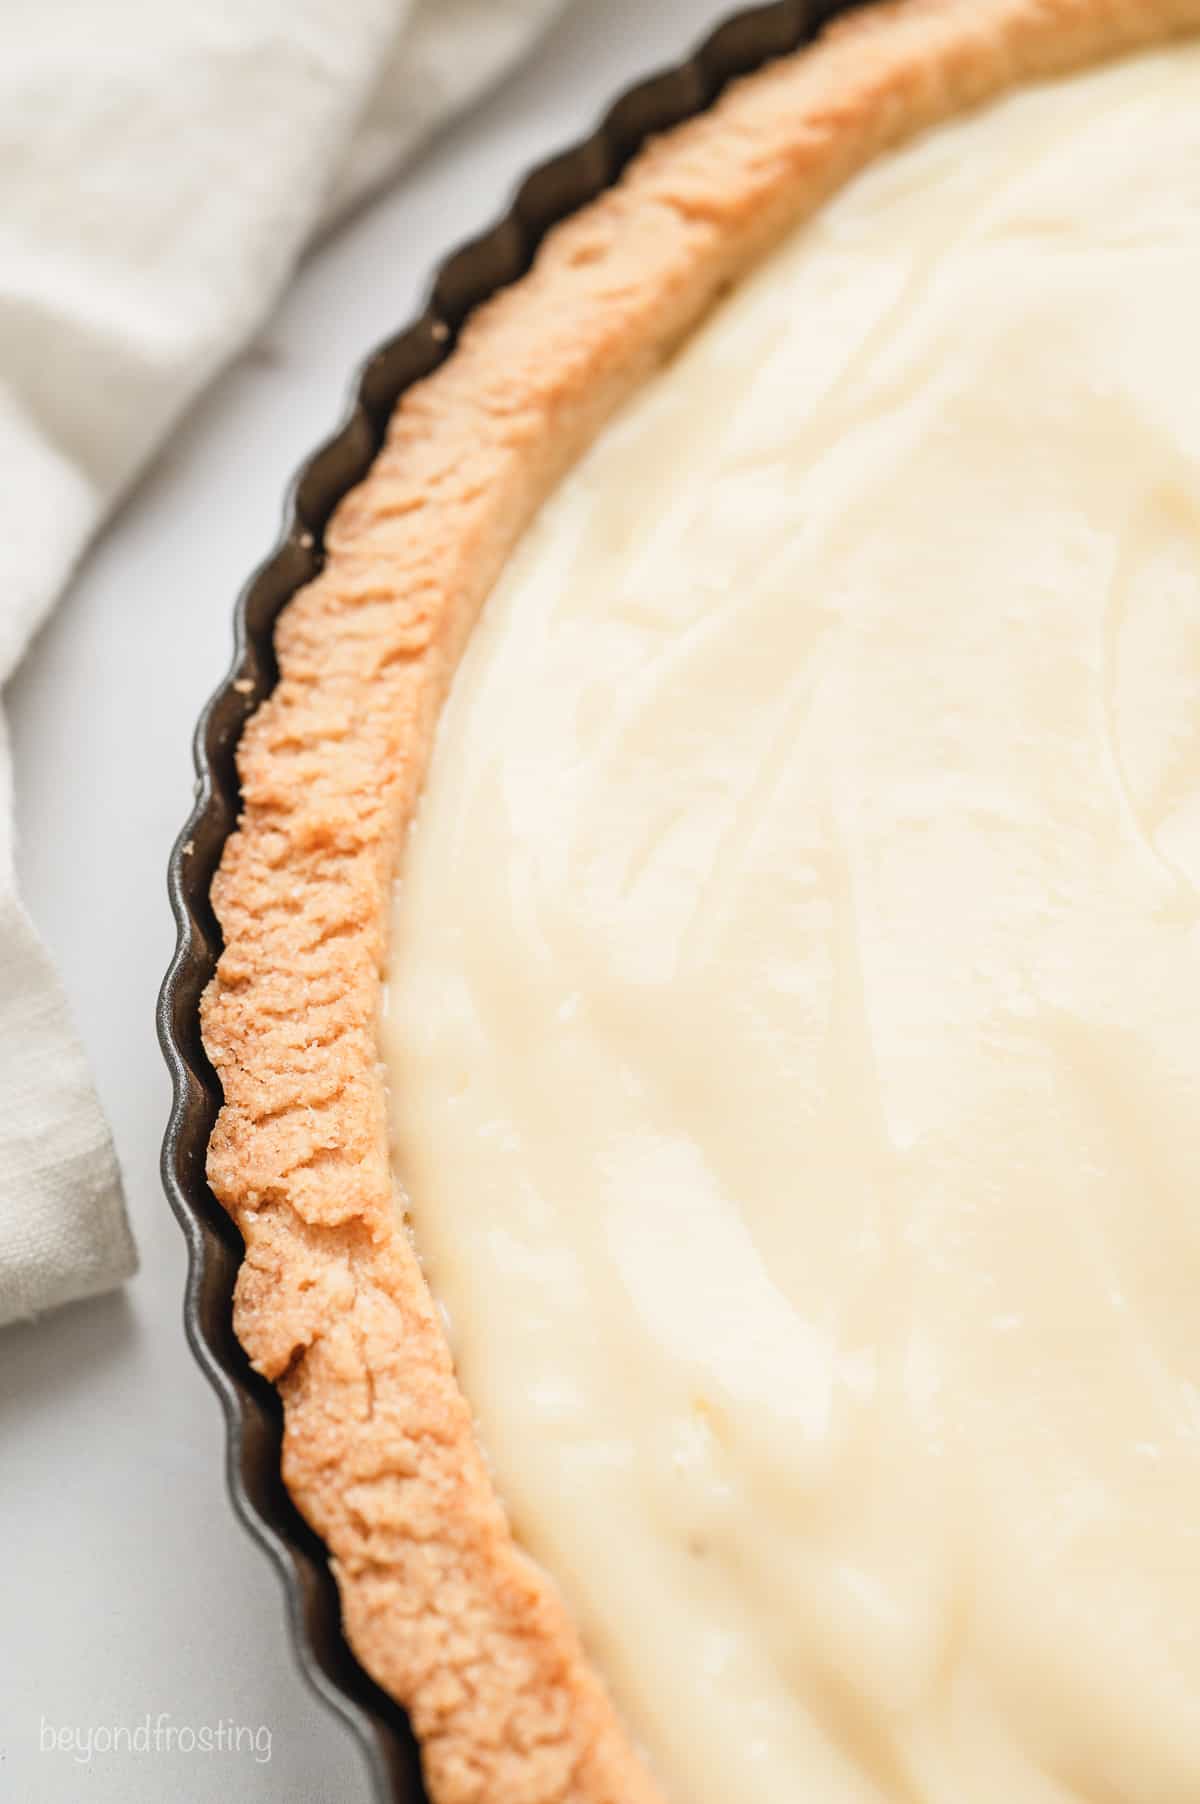 Overhead close up view of a tart shell filled with pastry cream.